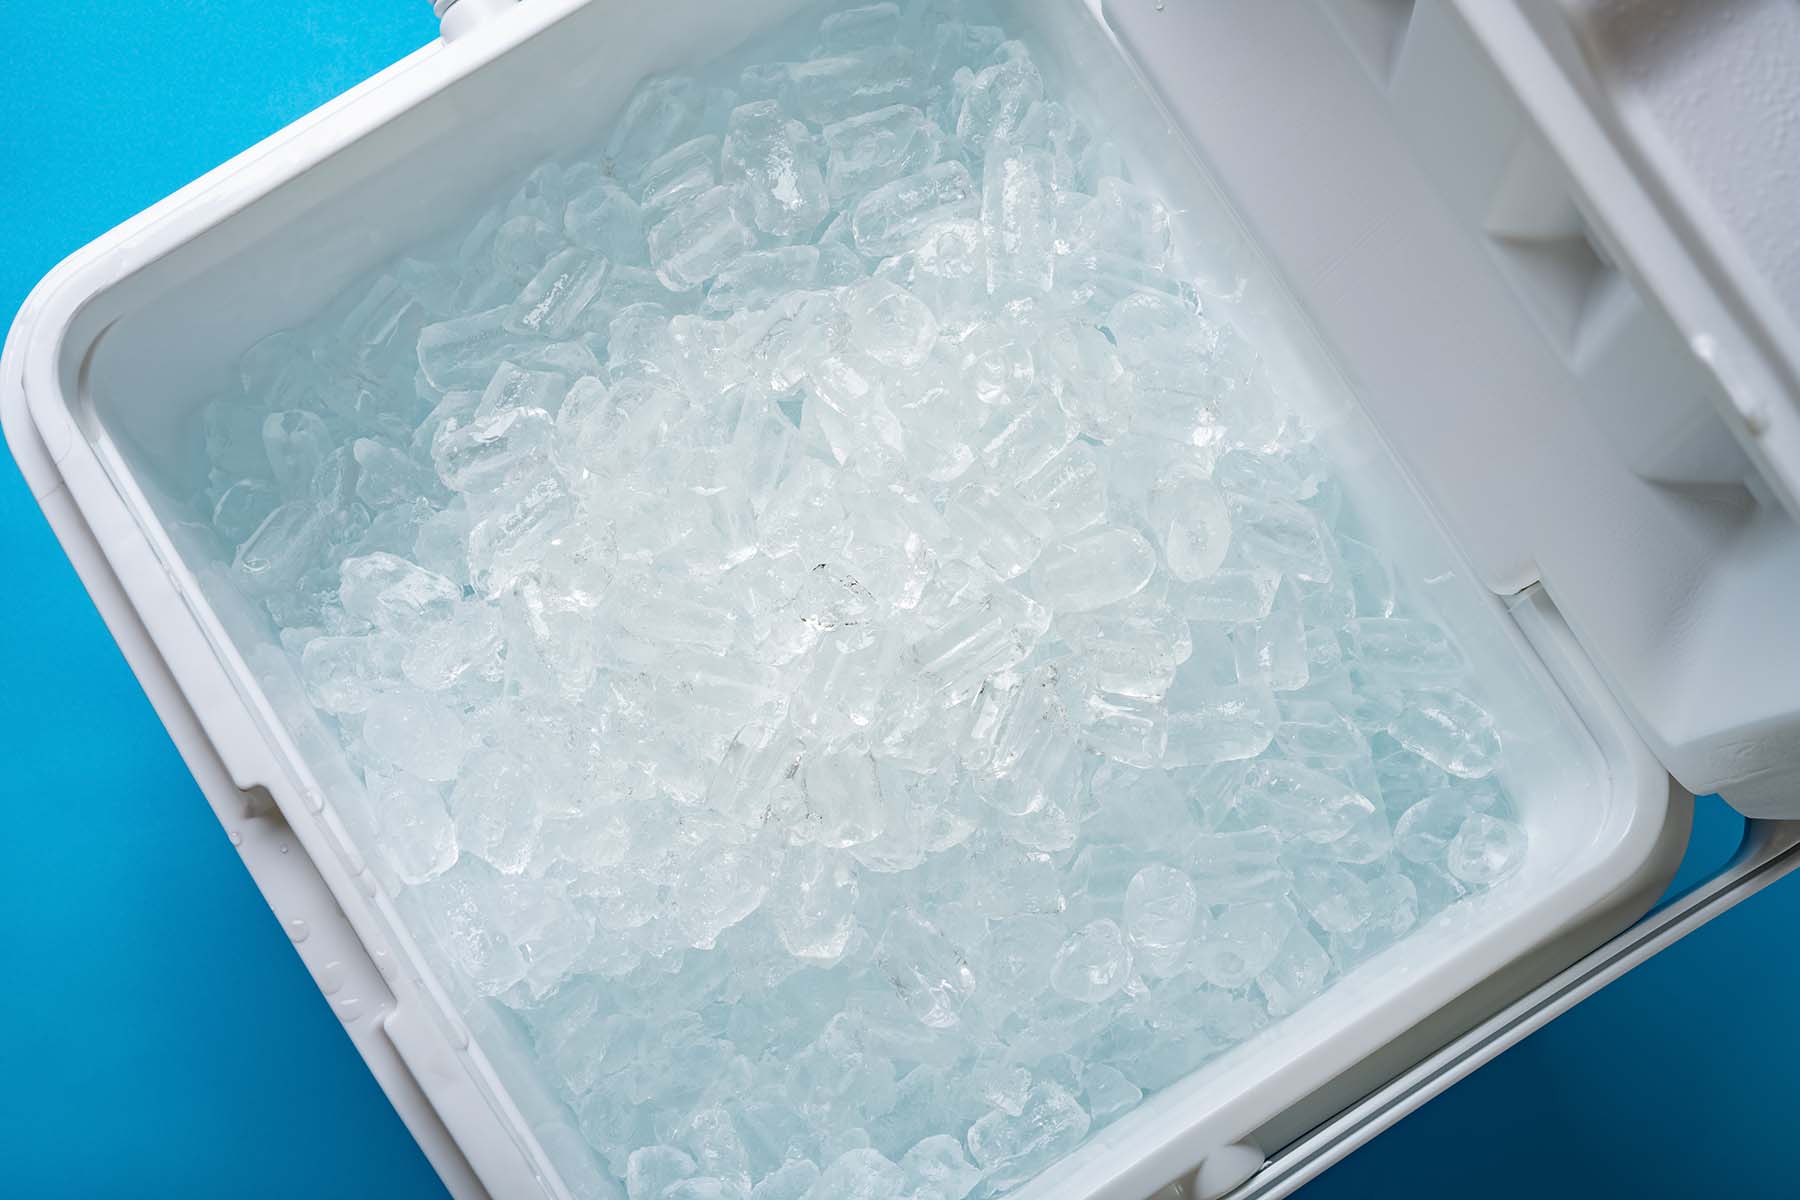 Insulation case full of ice for immersion therapy on a blue background